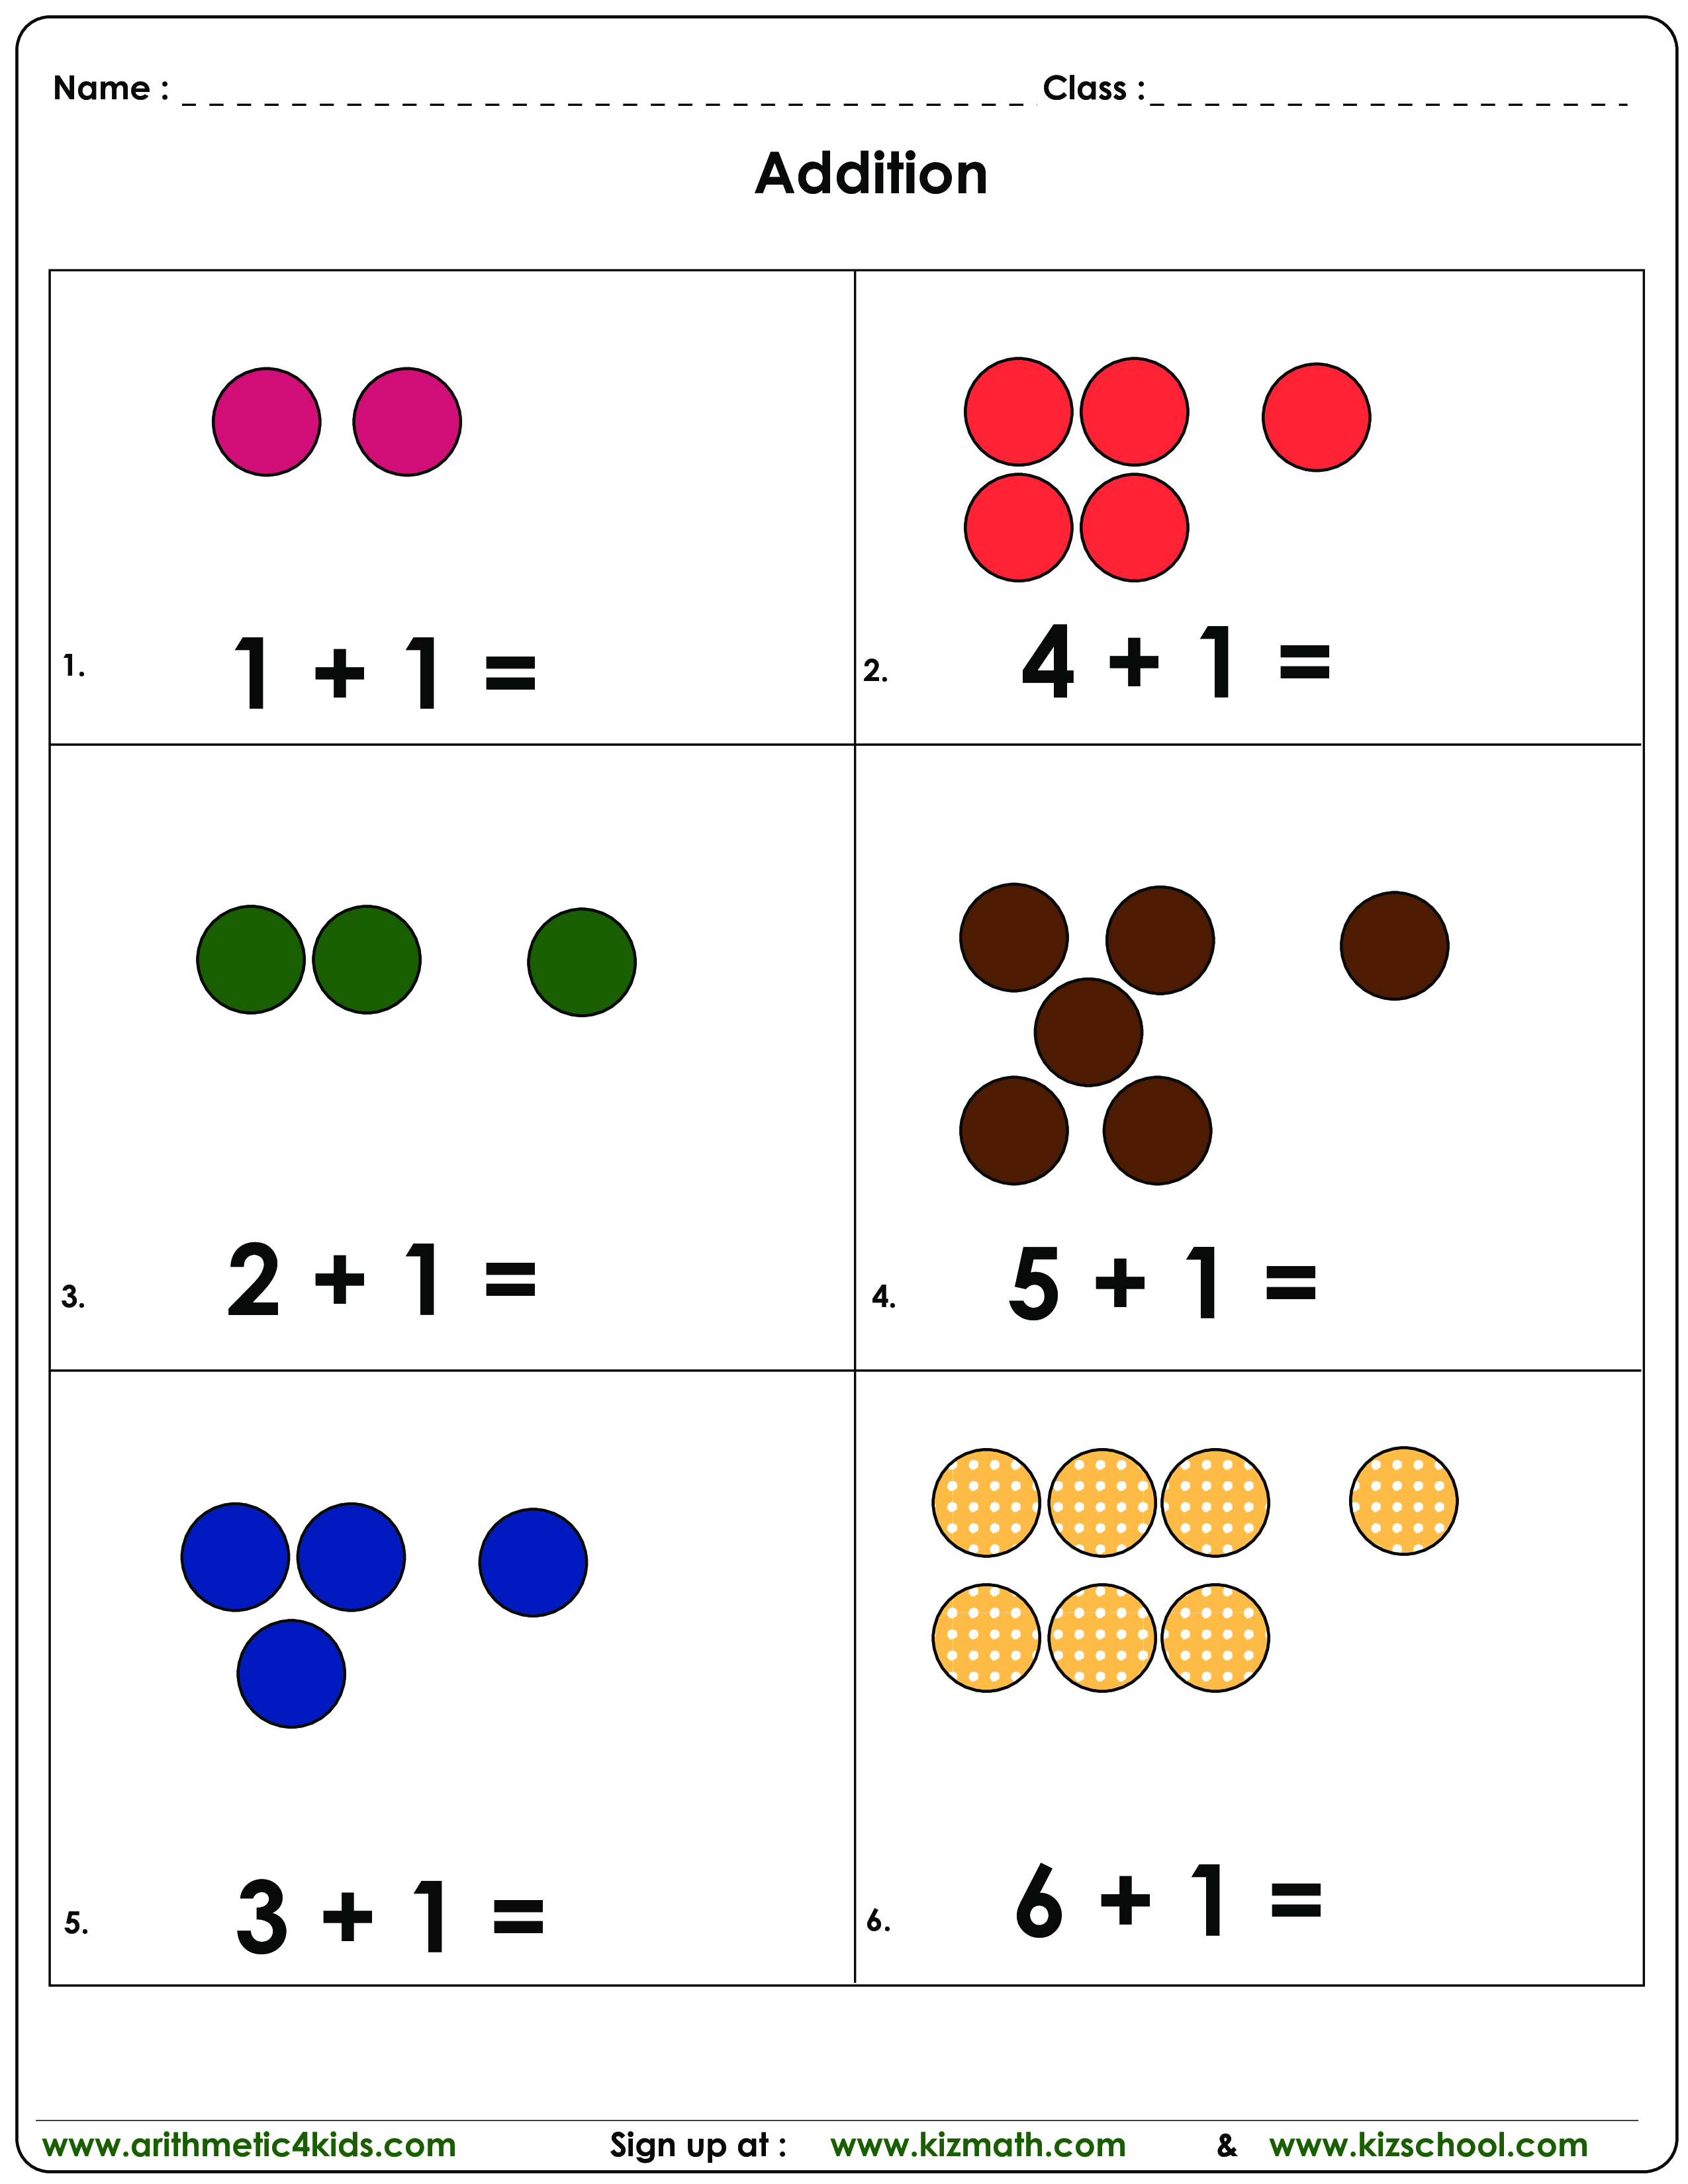 Add 1 To Other Numbers Up To 6 With Dots main image